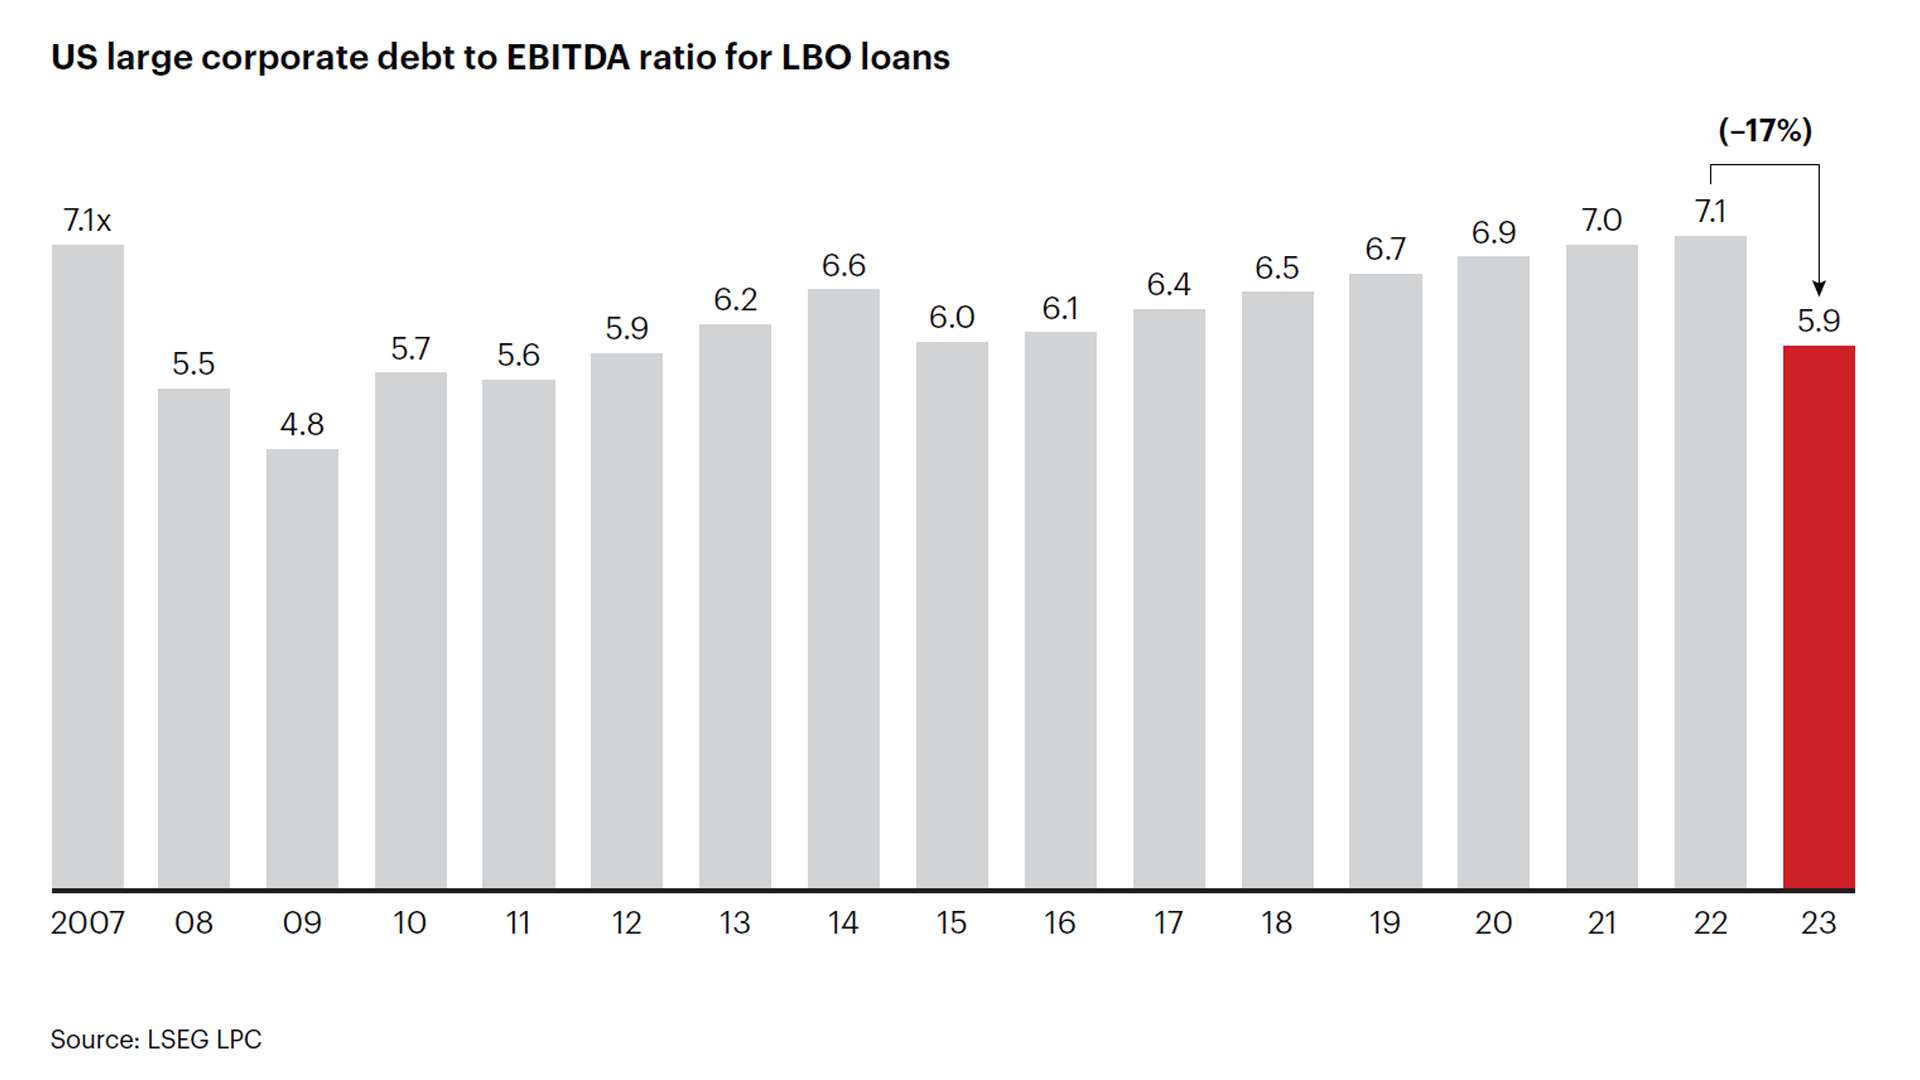 US large corporate debt to EBITDA ratio for LBO loans